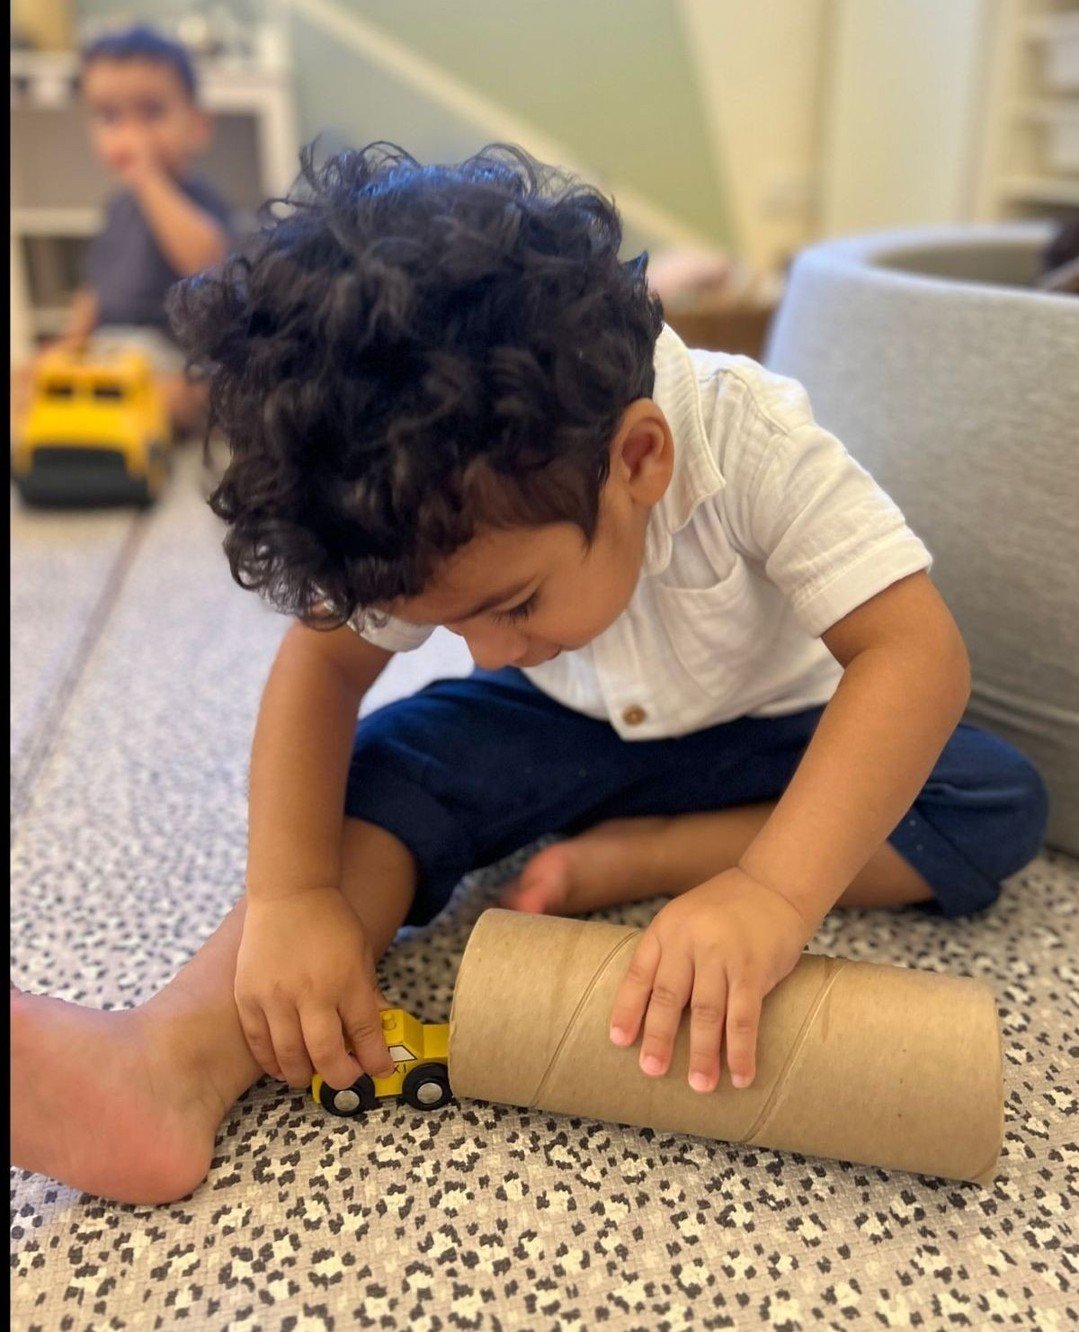 Imagination knows no limits! 🚗💨 Exploring new roads and endless adventures with just a cardboard tube and a toy car.⁠
⁠
⁠
#inspirephilosophy#learningthroughplay #playbasedlearning  #econursery #jumeirah #dubaitag #dubaiinstagram #mydubai #instagram